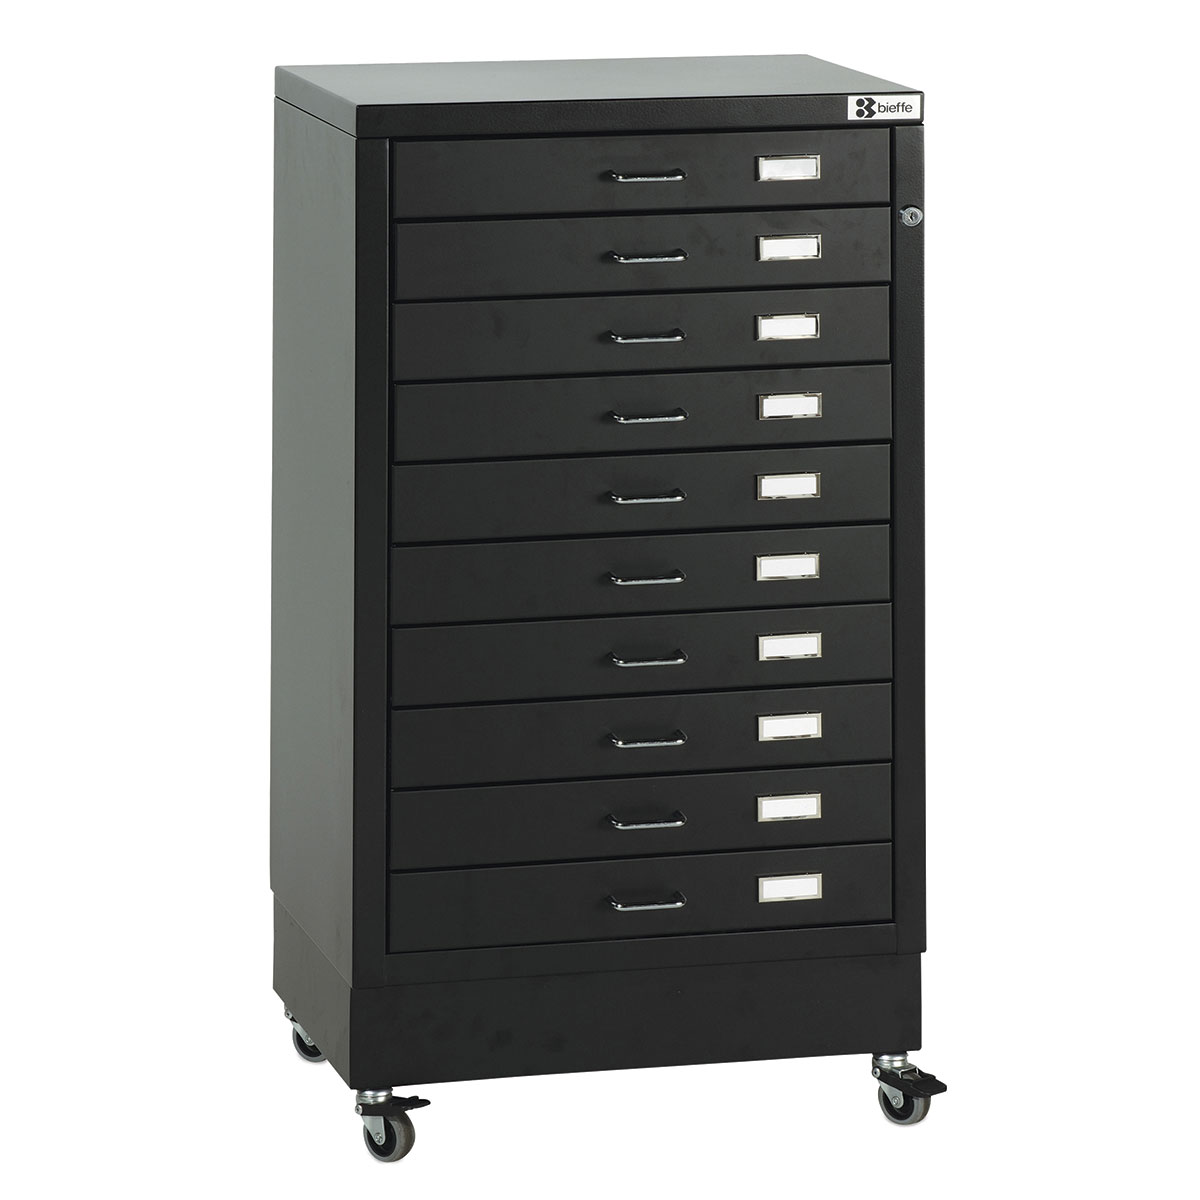 OFFEX Flat File Storage Folders Stores Flat Items up to 12 in. x